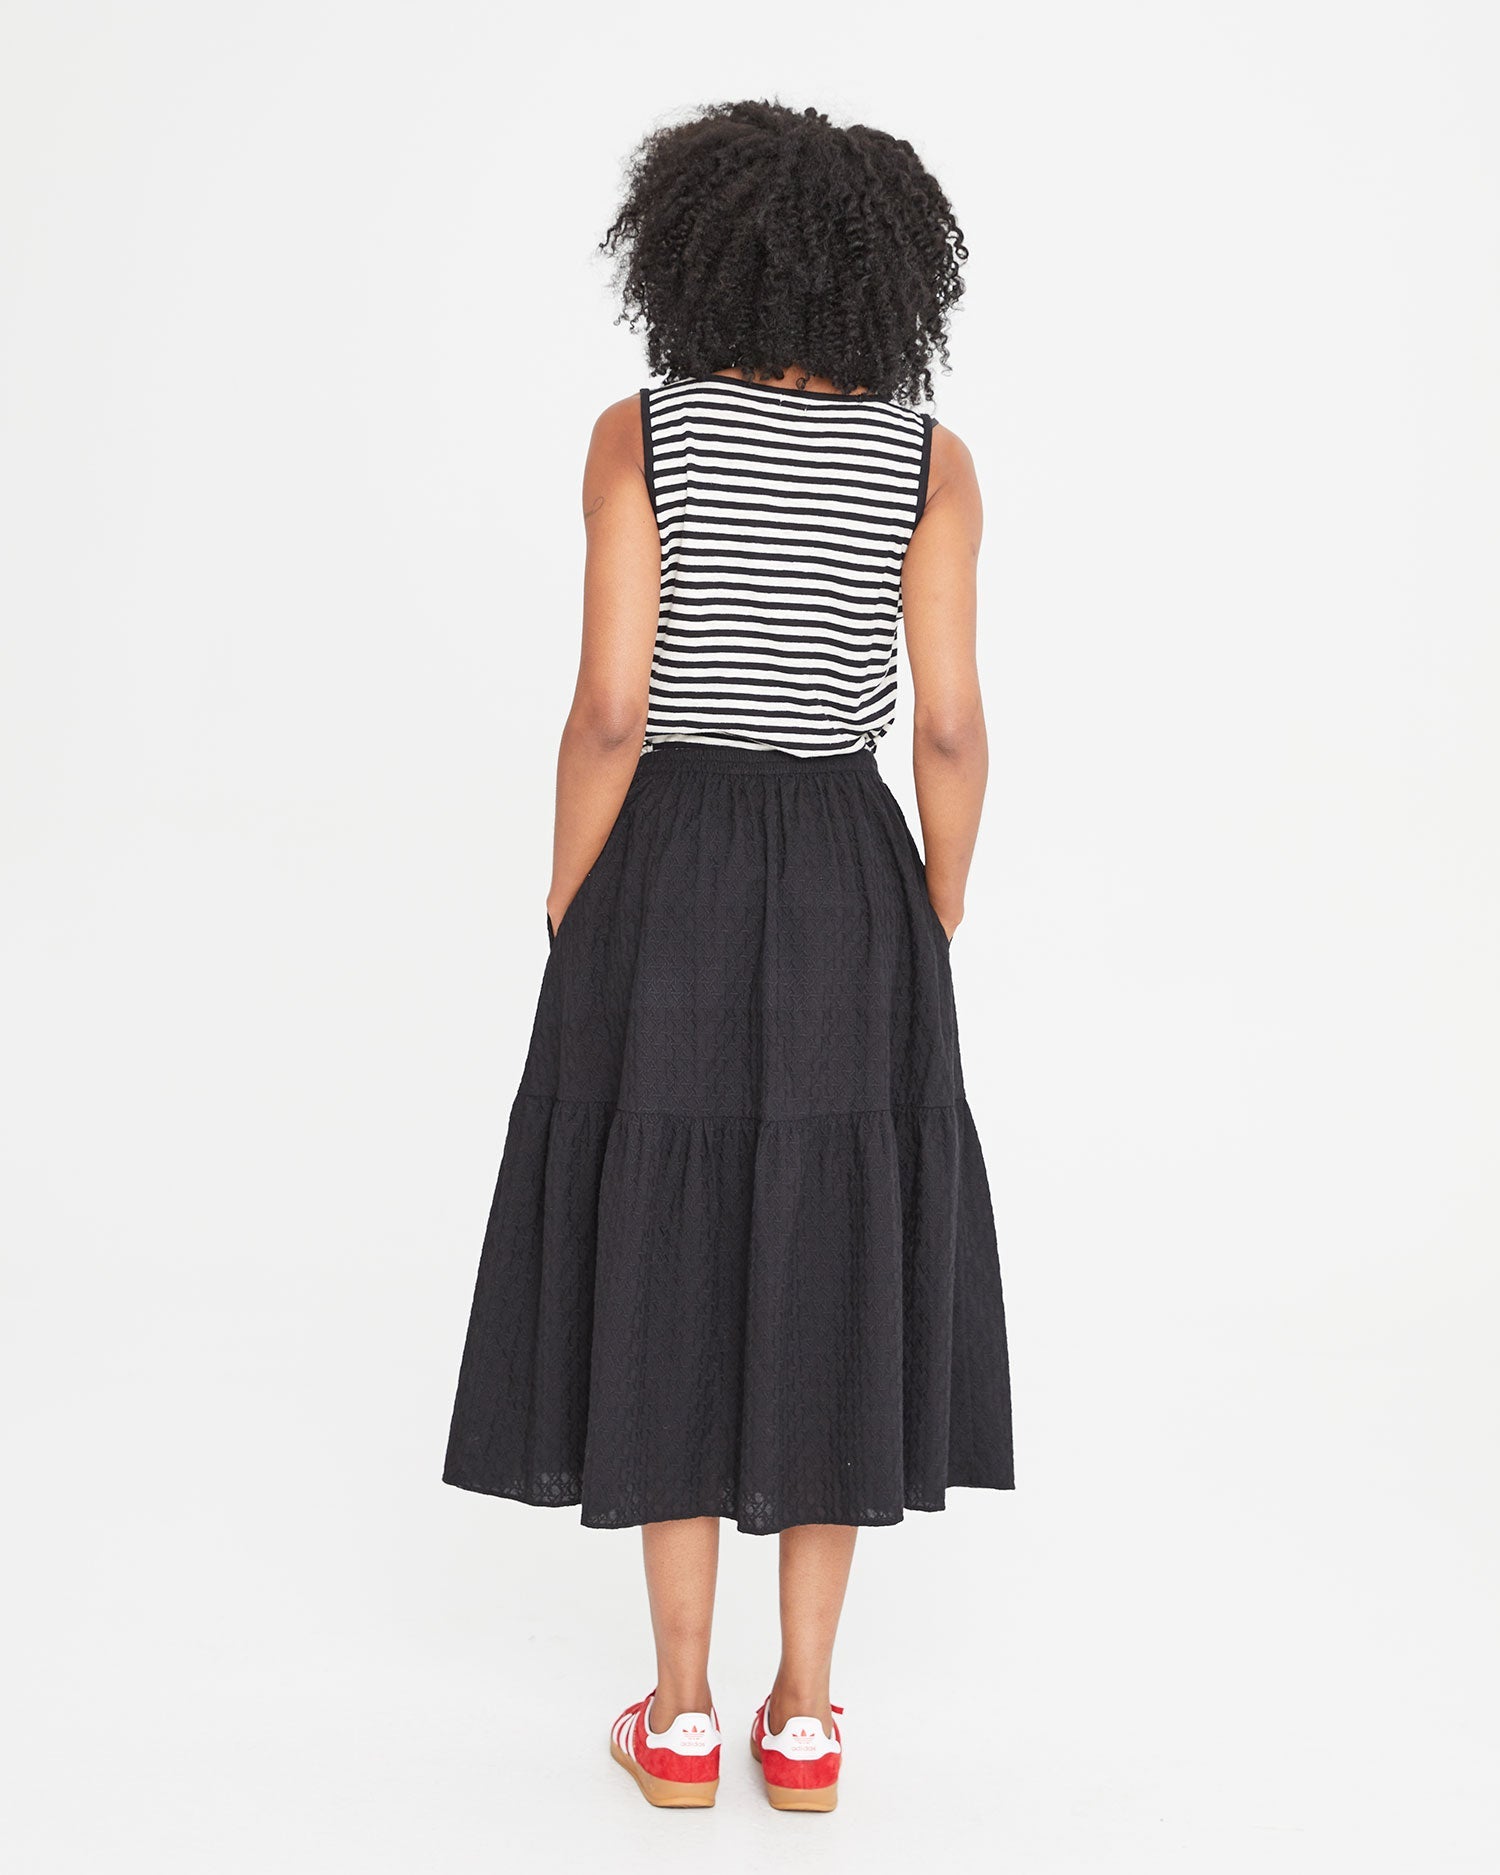 back view of Mecca in the Black Eyelet Rattan Manon Skirt and a black and white striped tank top 